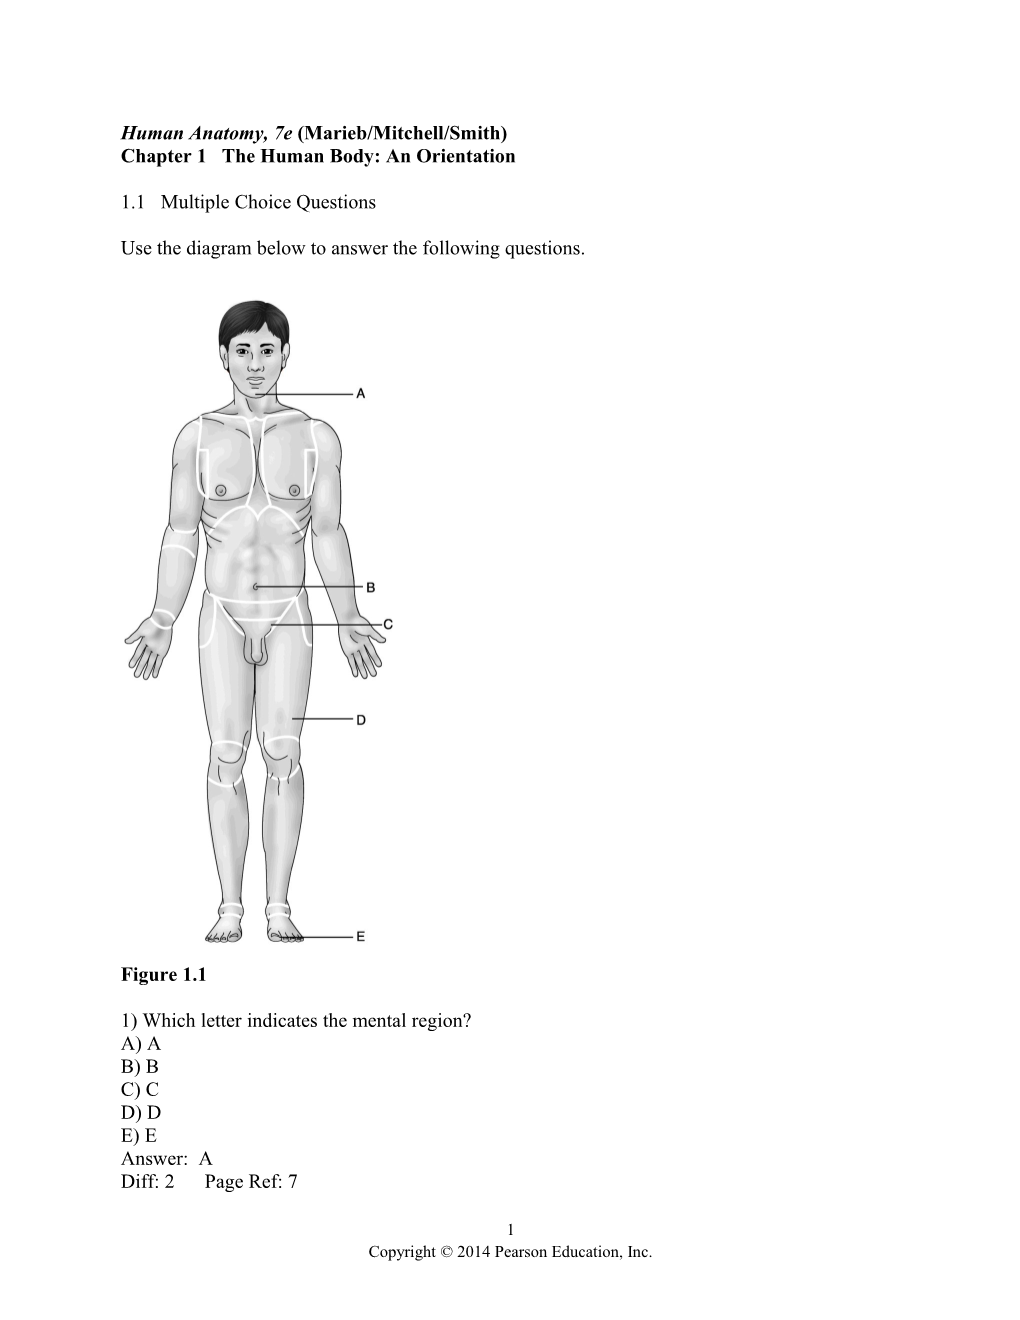 Chapter 1 the Human Body: an Orientation